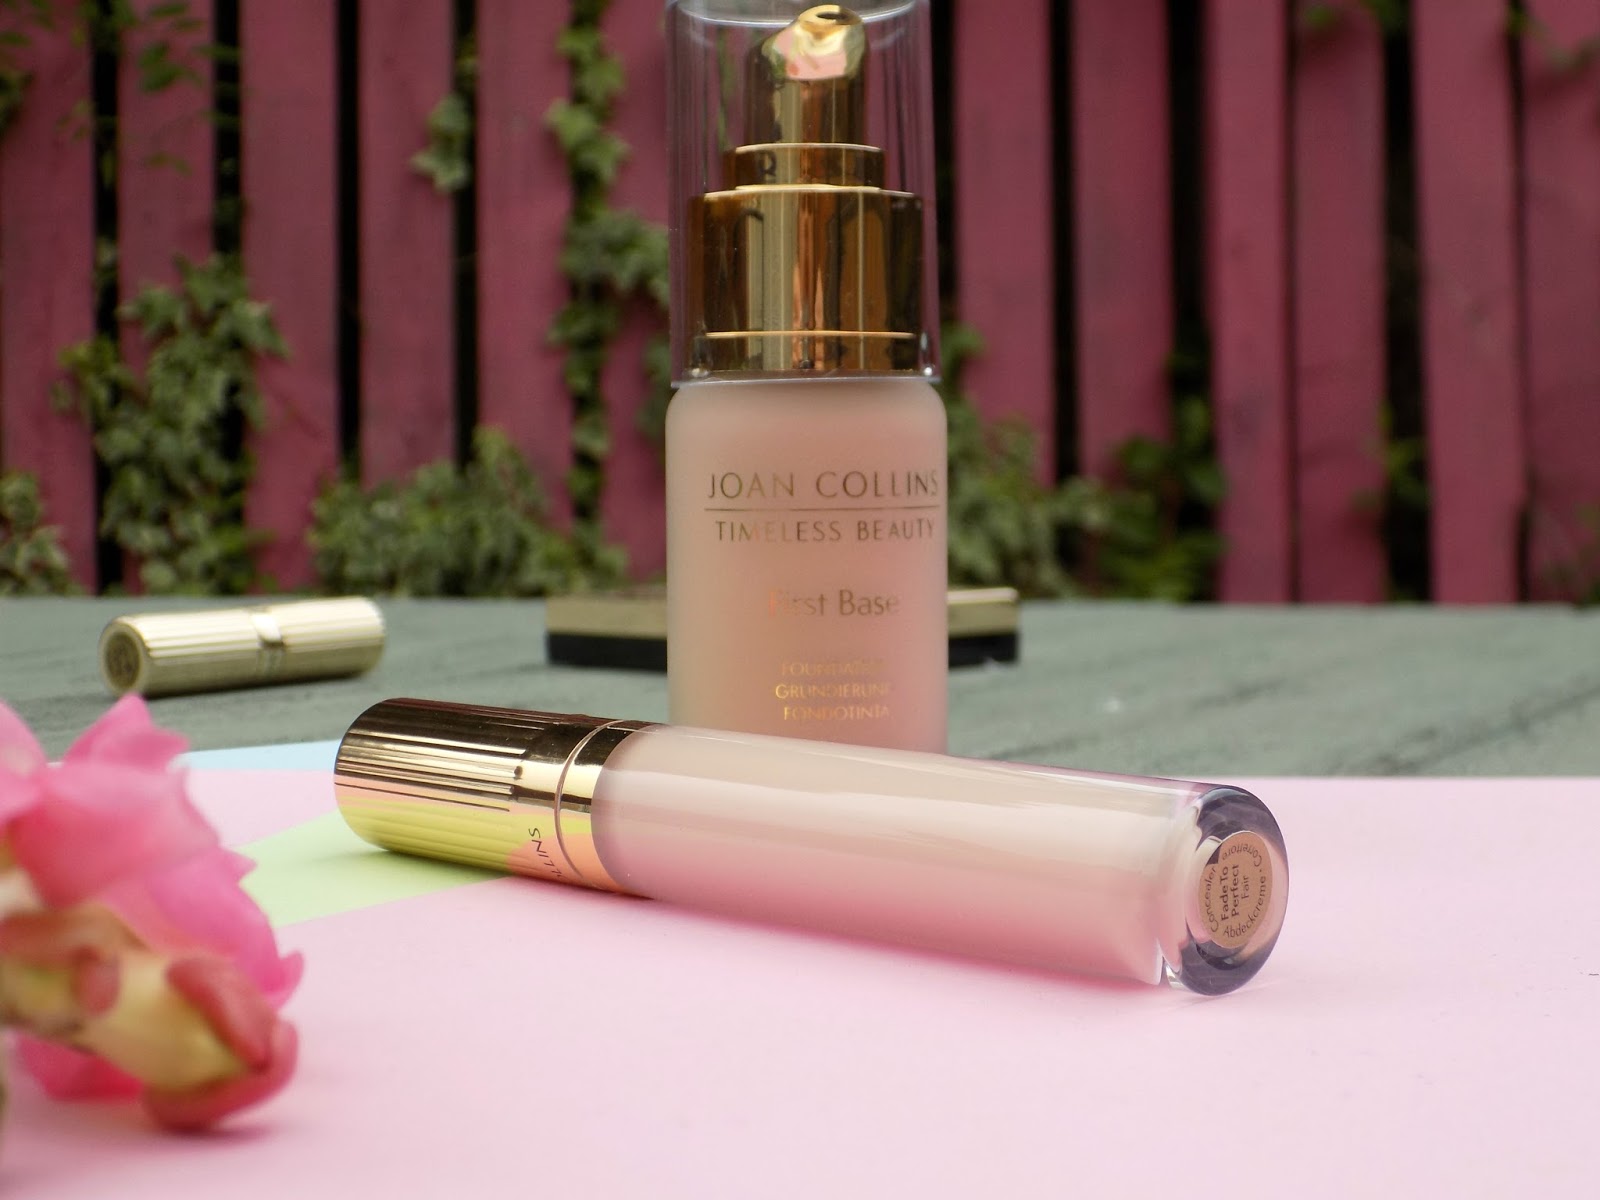 Joan Collins first base foundation and fade to perfect concealer